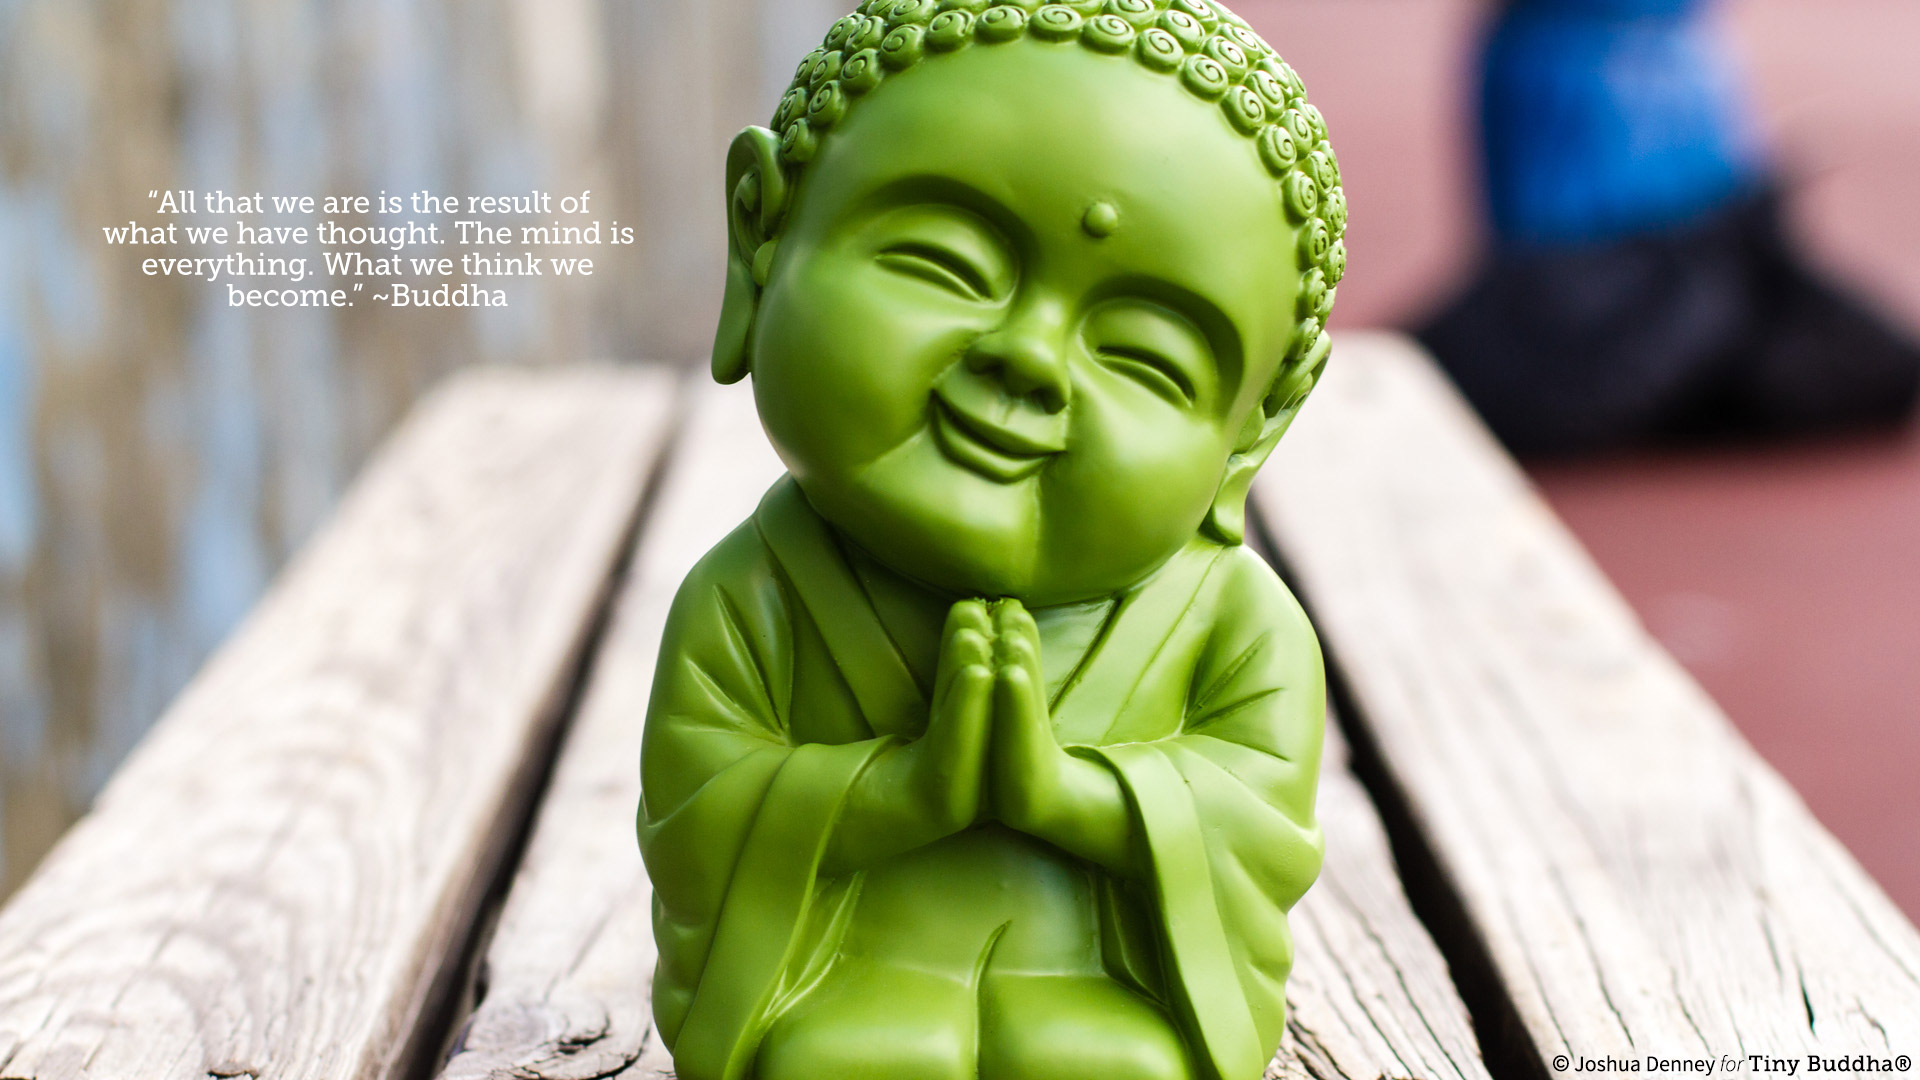 Buddha Wallpaper pictures HD green tiny